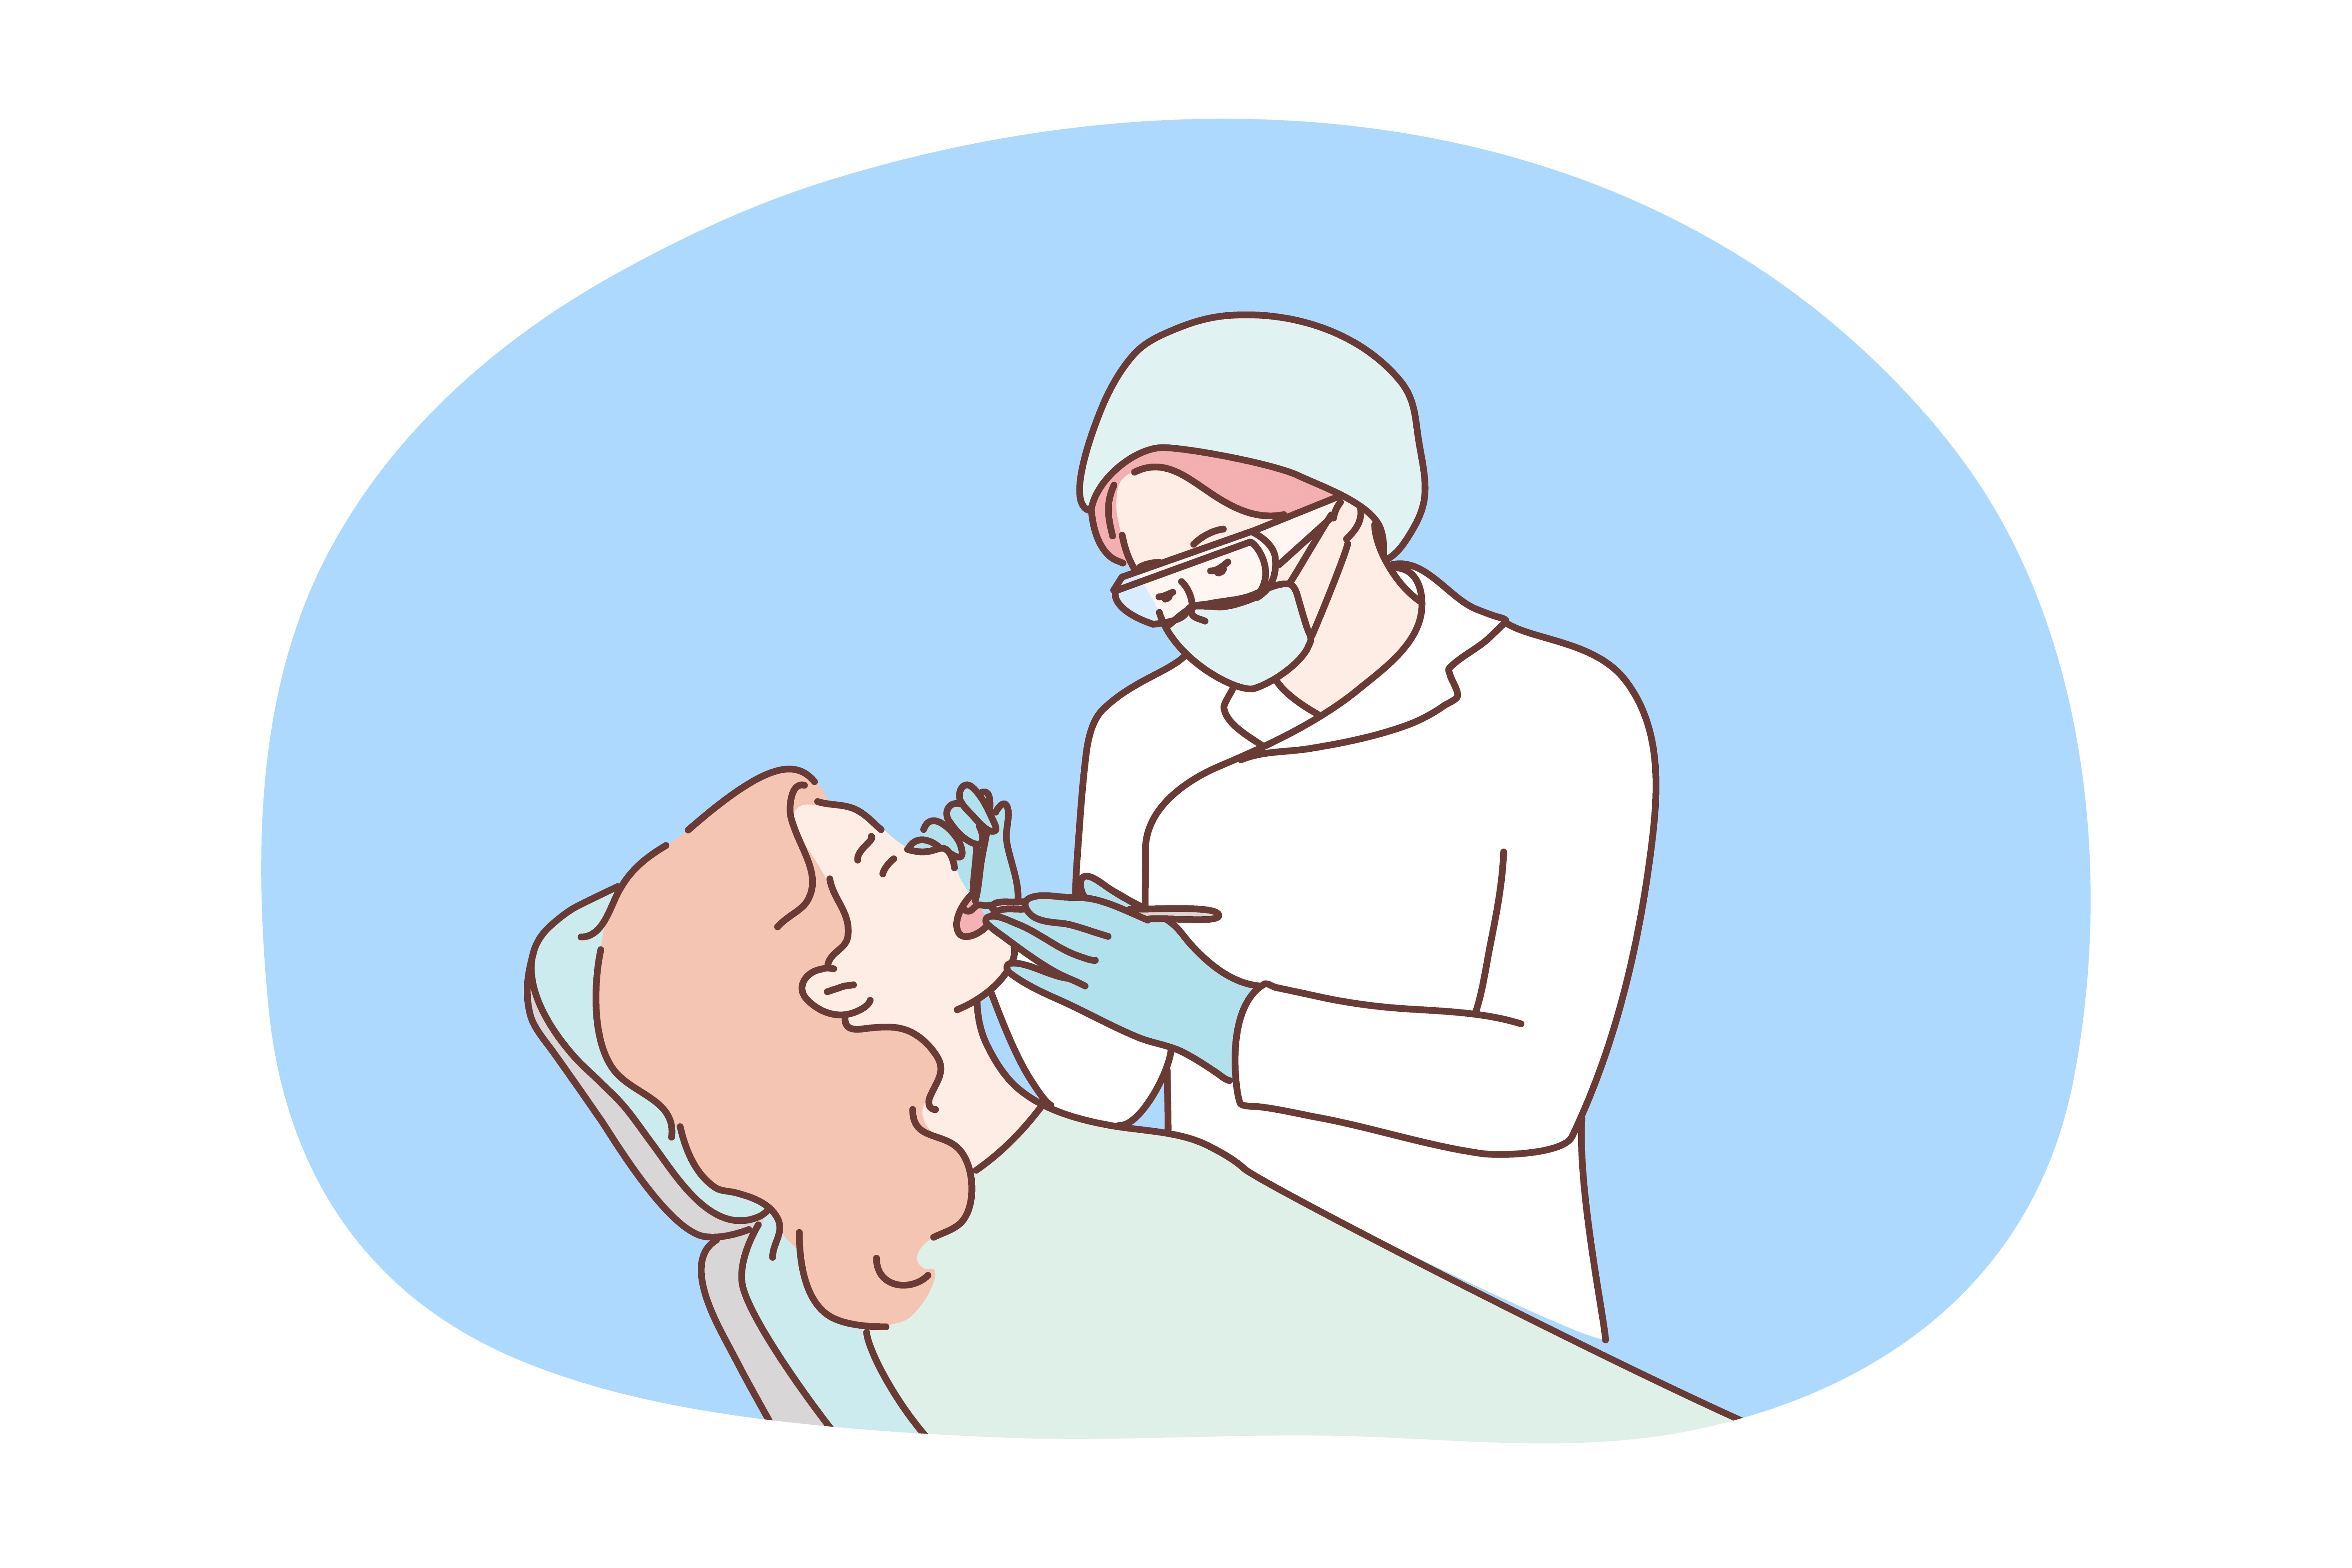 Health, care, medicine, dentistry concept. Woman doctor dentist checking examinates healing teeth of patient in special chair. Routine dental checkup procedure or toothache oral treatment illustration. Health, care, medicine, dentistry, healing concept